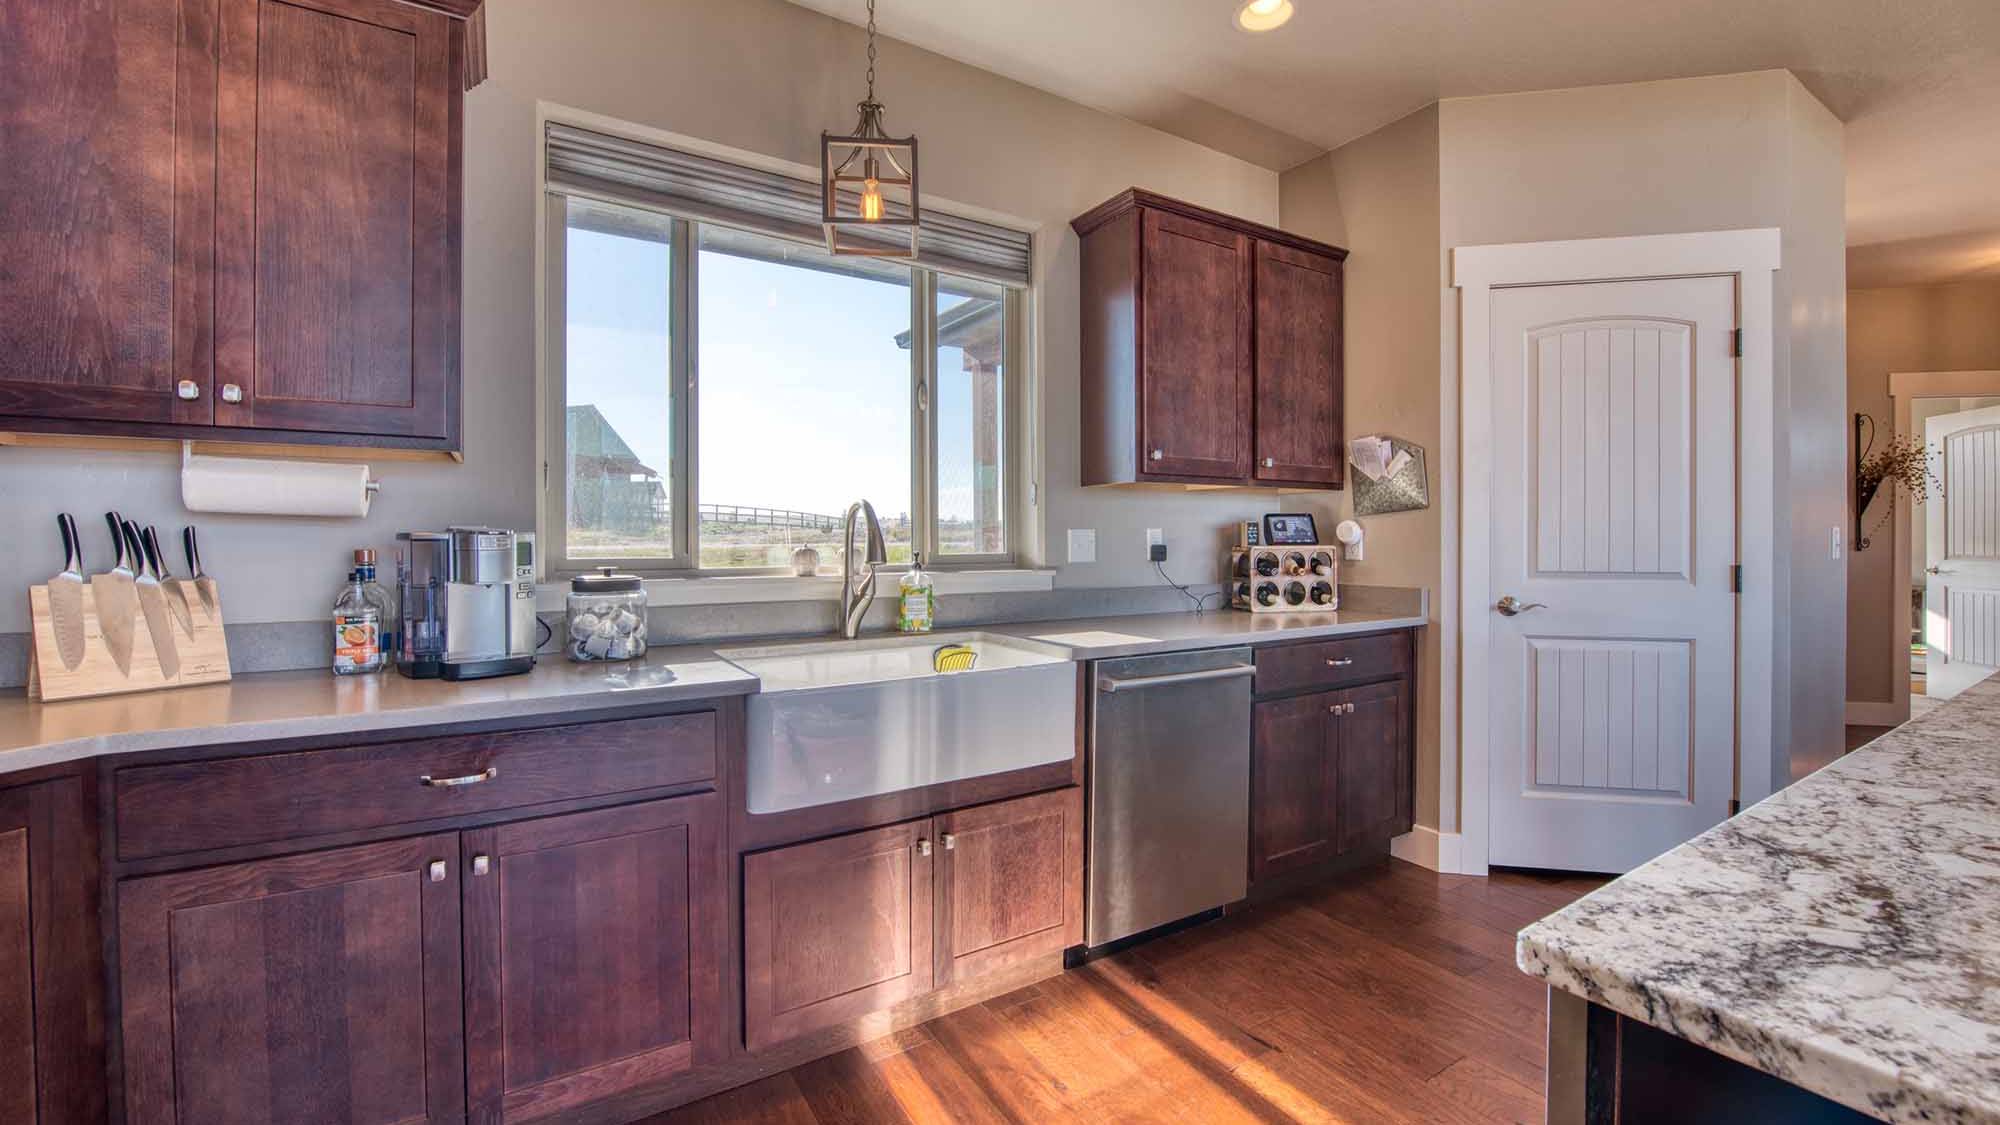 Kitchen with island, granite countertops and wood floors in The Copper Creek model home - Built by Big Sky Builder in Florence, MT